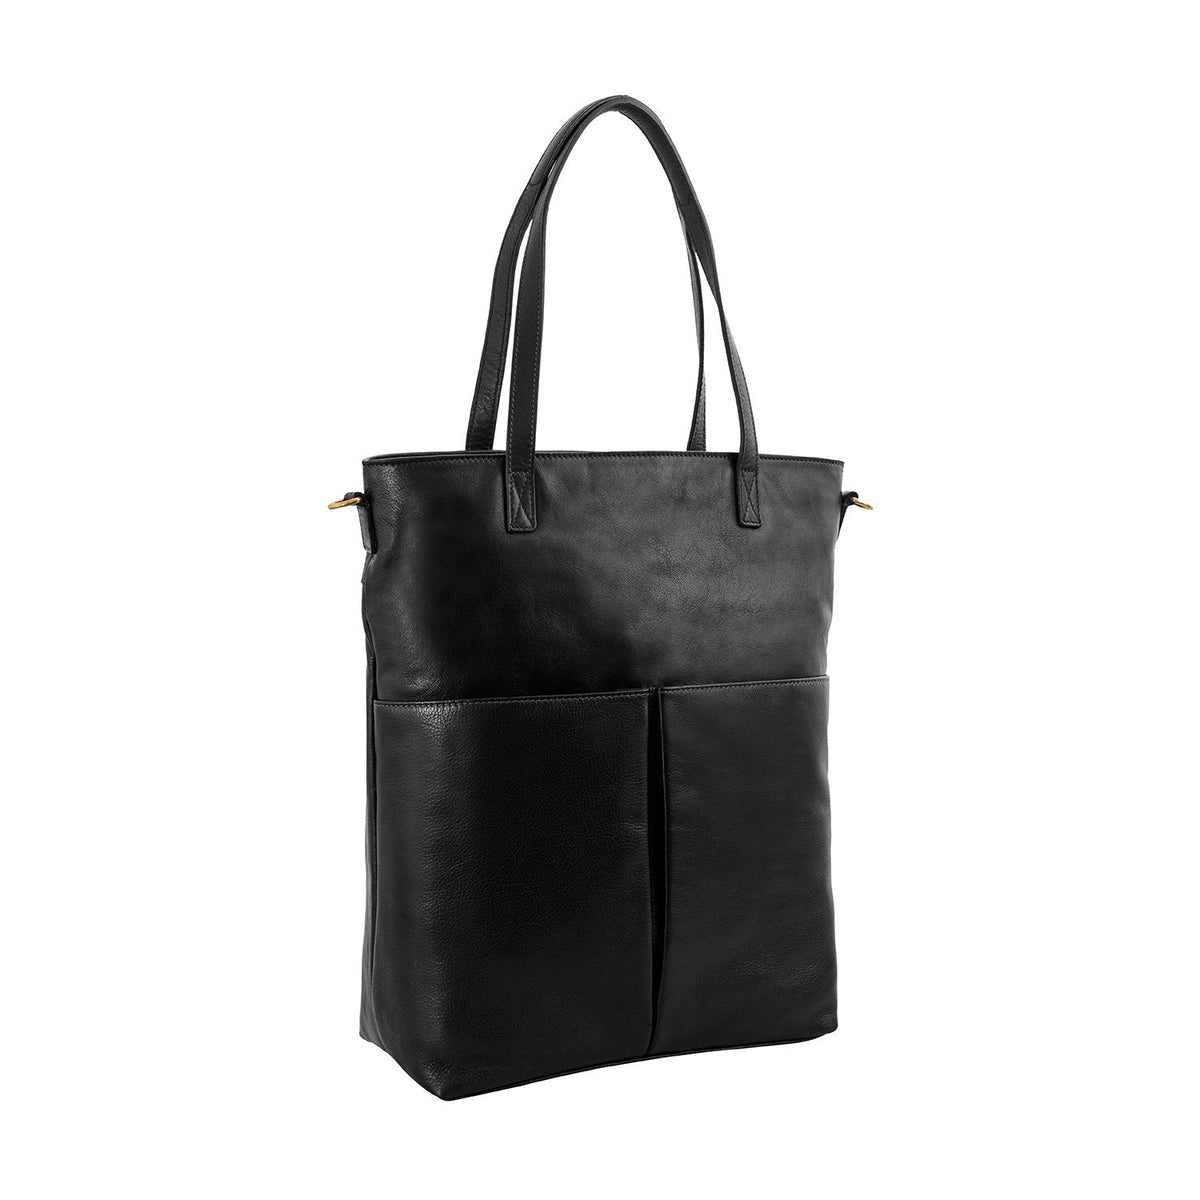 Bags & Luggage - Women's Bags - Shoulder Bags Pepper Large Leather Tote With Sling Strap